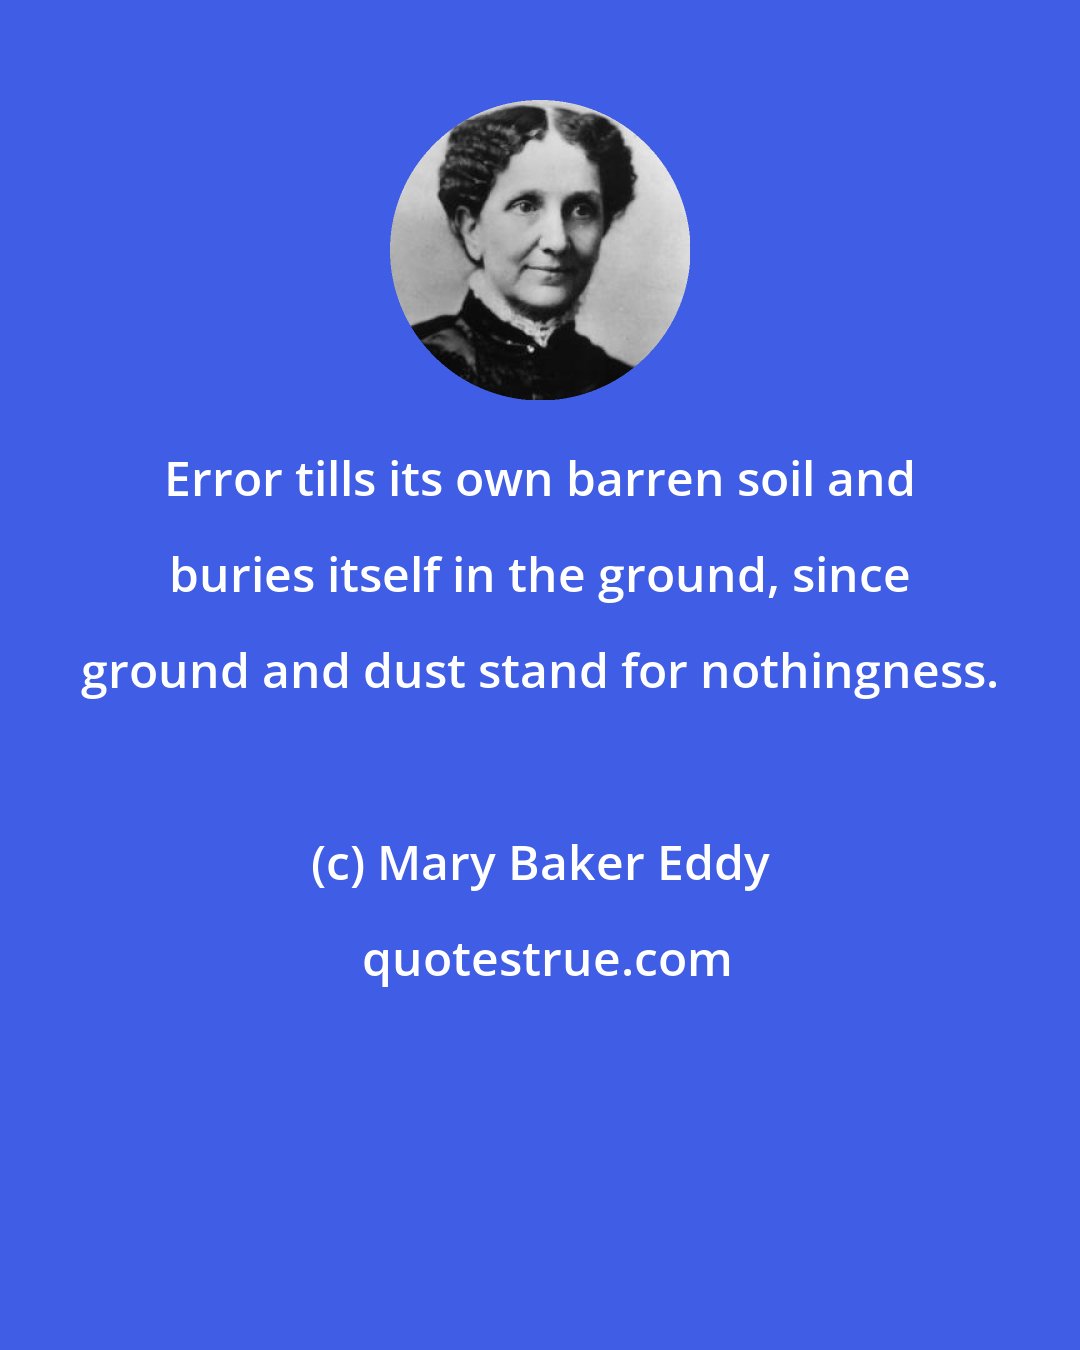 Mary Baker Eddy: Error tills its own barren soil and buries itself in the ground, since ground and dust stand for nothingness.